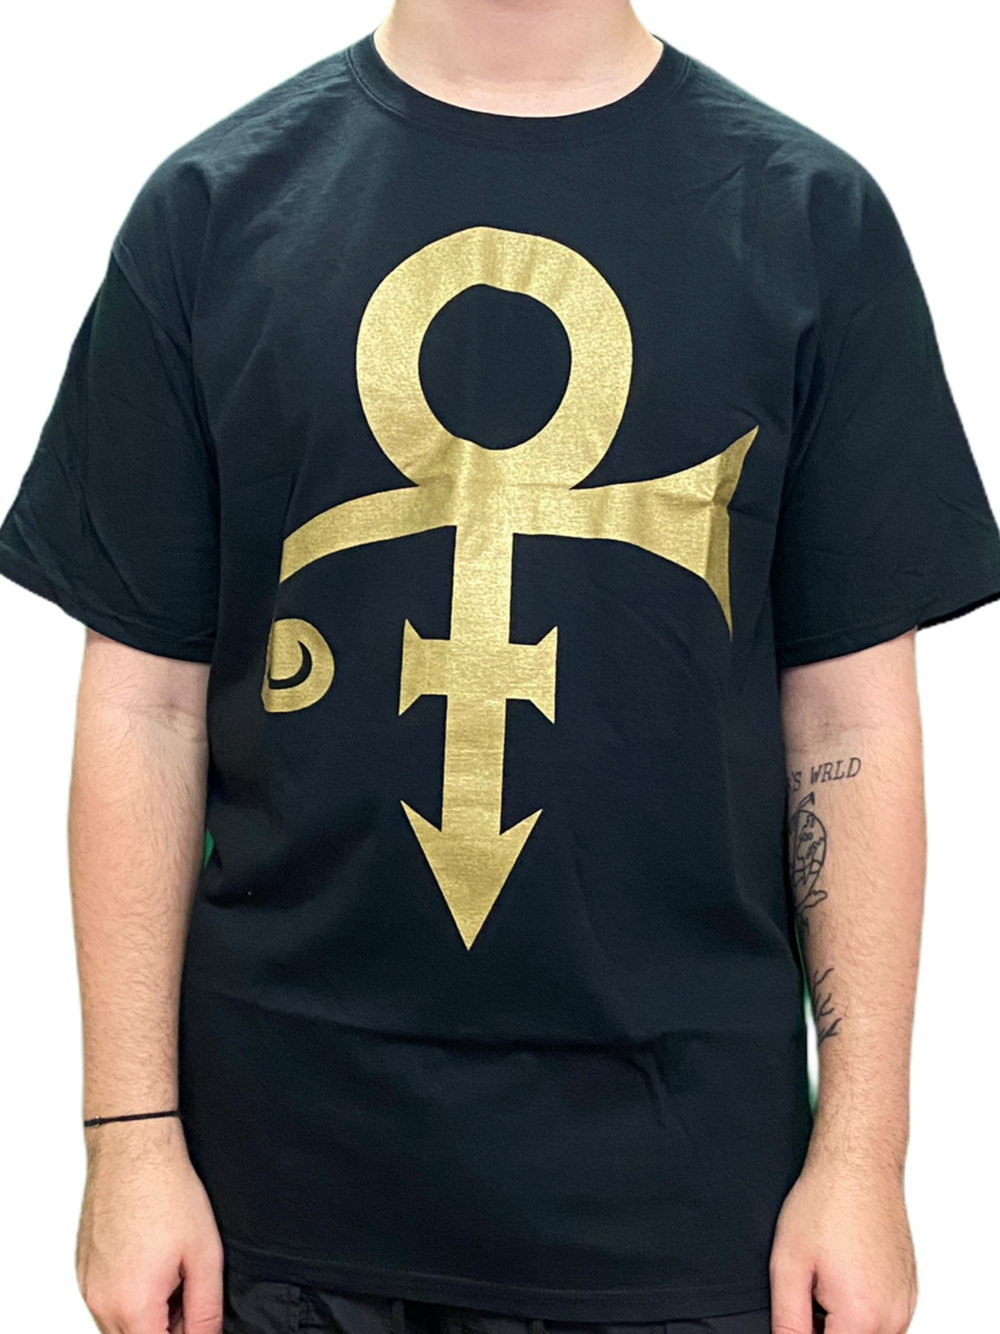 Prince – Love Symbol Gold Sparkle Unisex Official Merchandise T Shirt Made In USA NEW